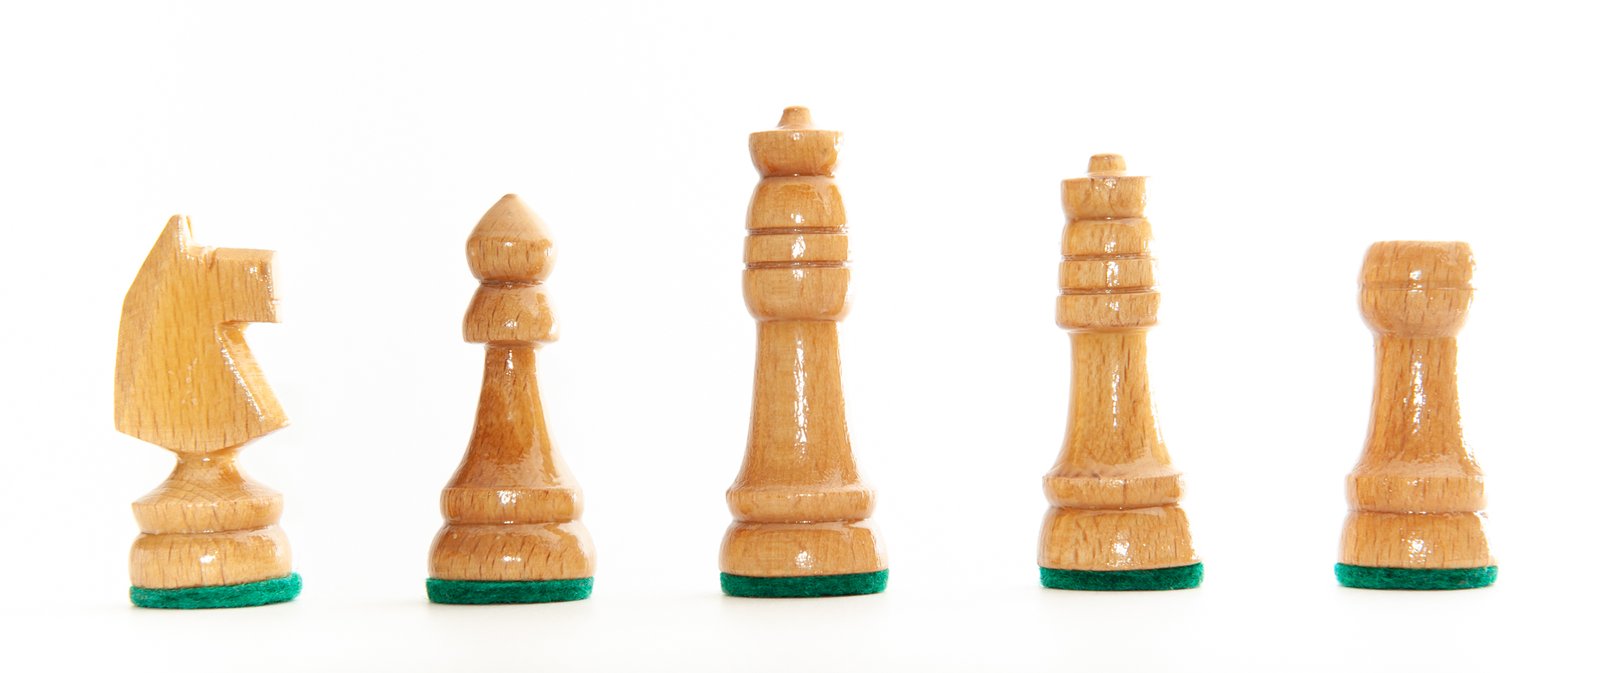 chess pieces names and moves